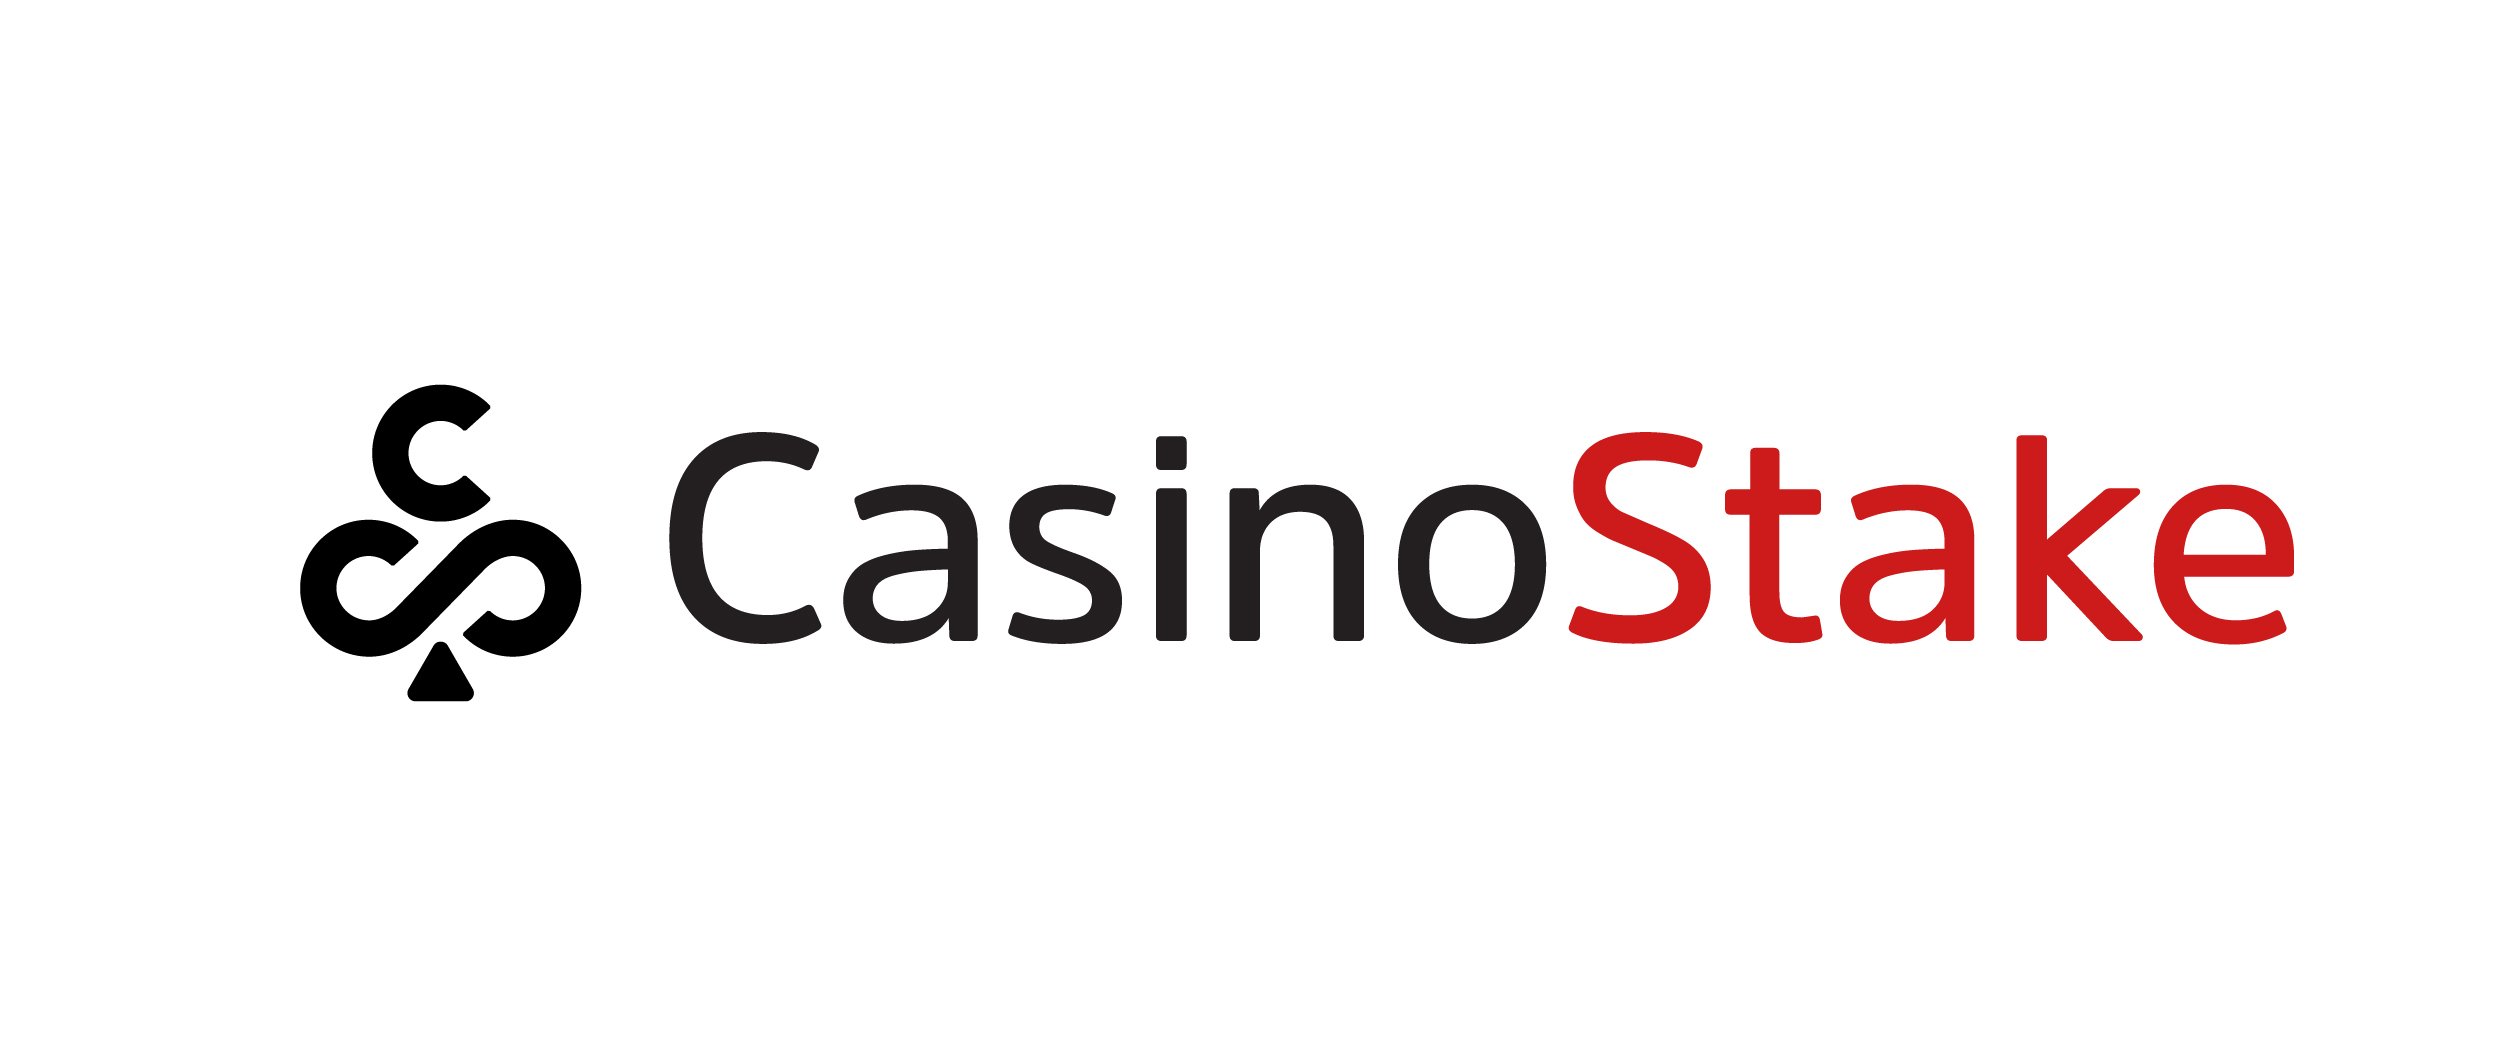 Casino Stake Nominated as Rising Star of the Year